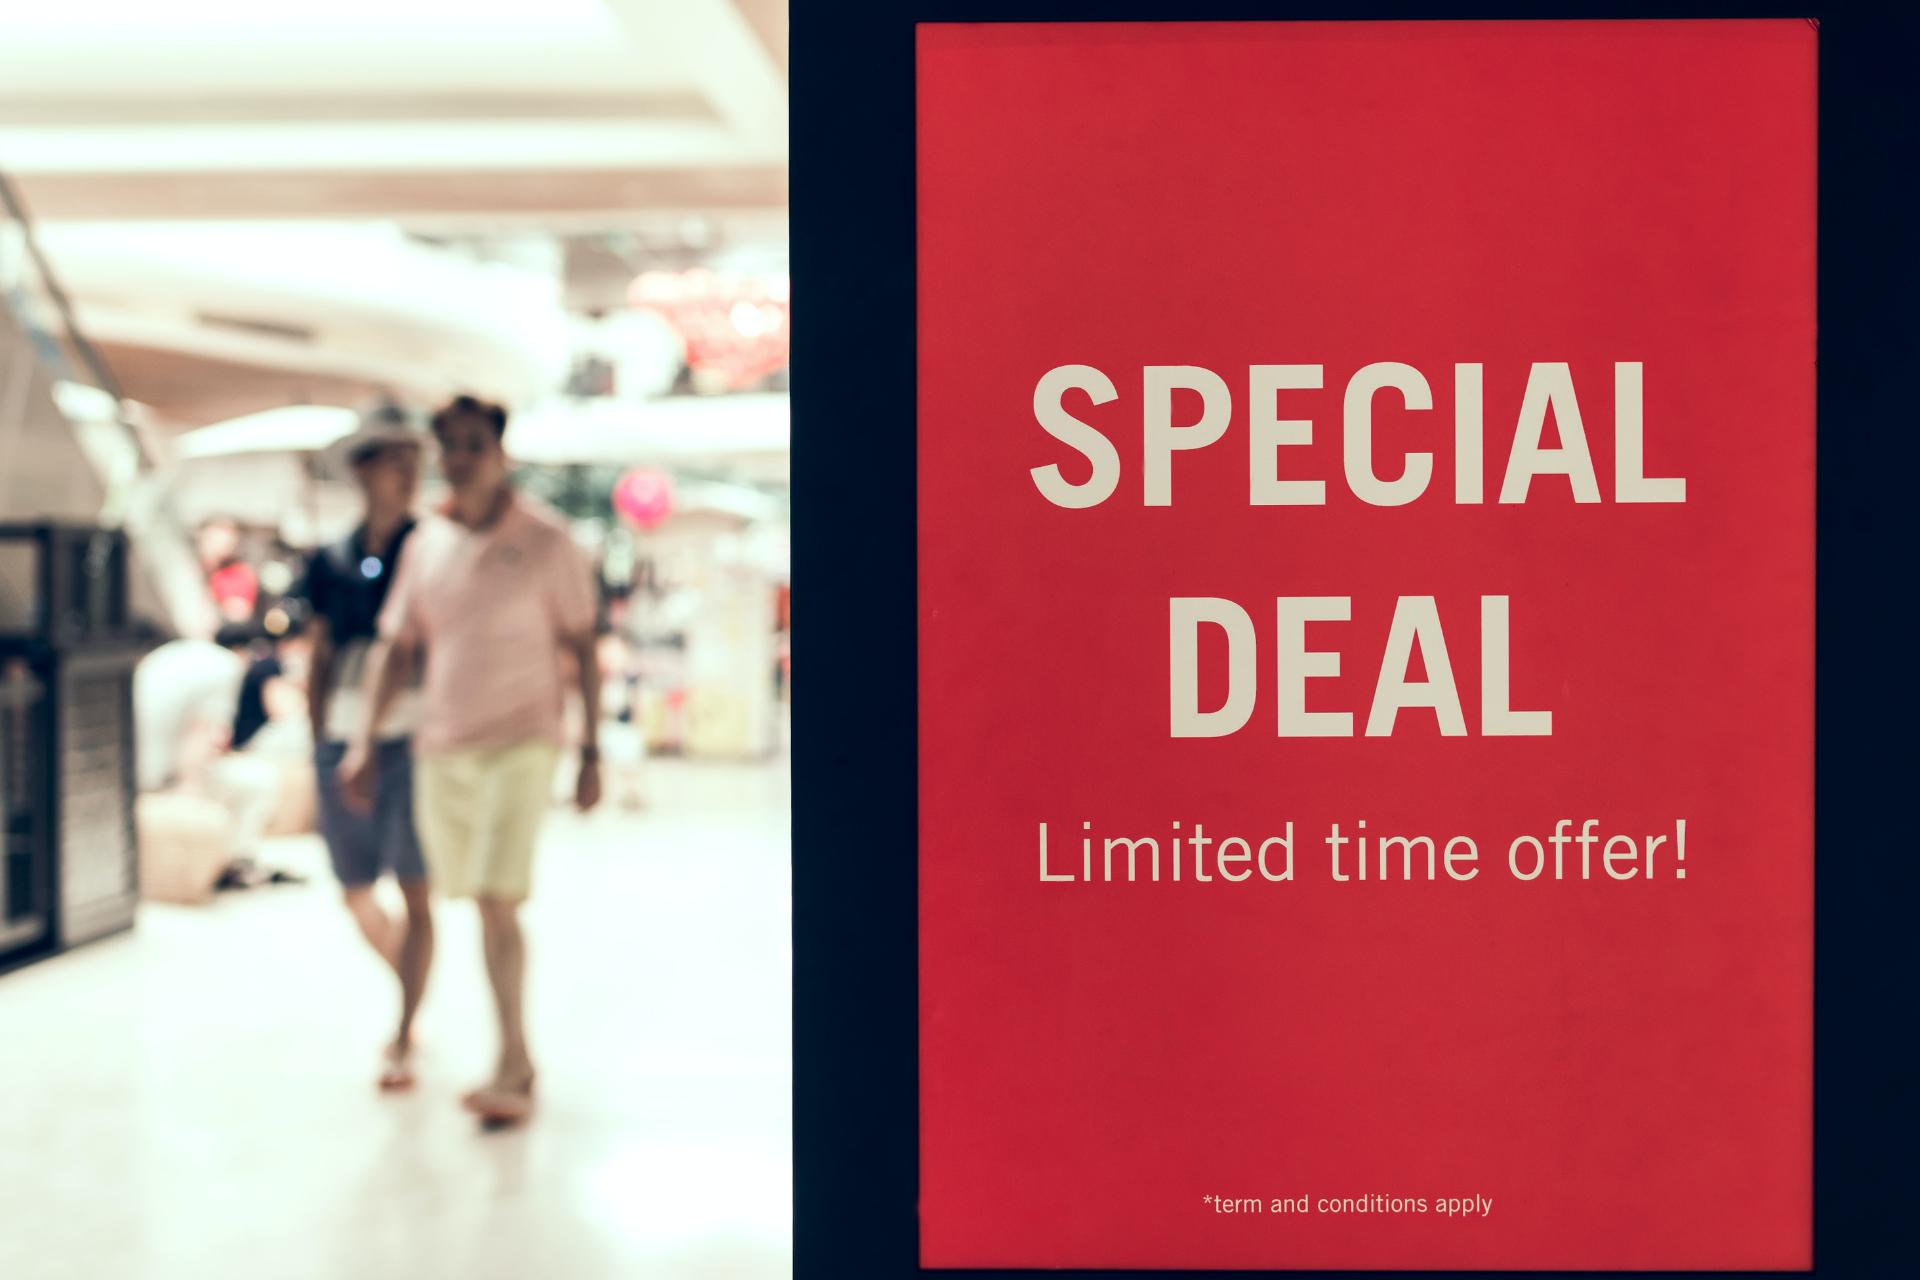 Special deal and limited offer sign on door and people walking in the background